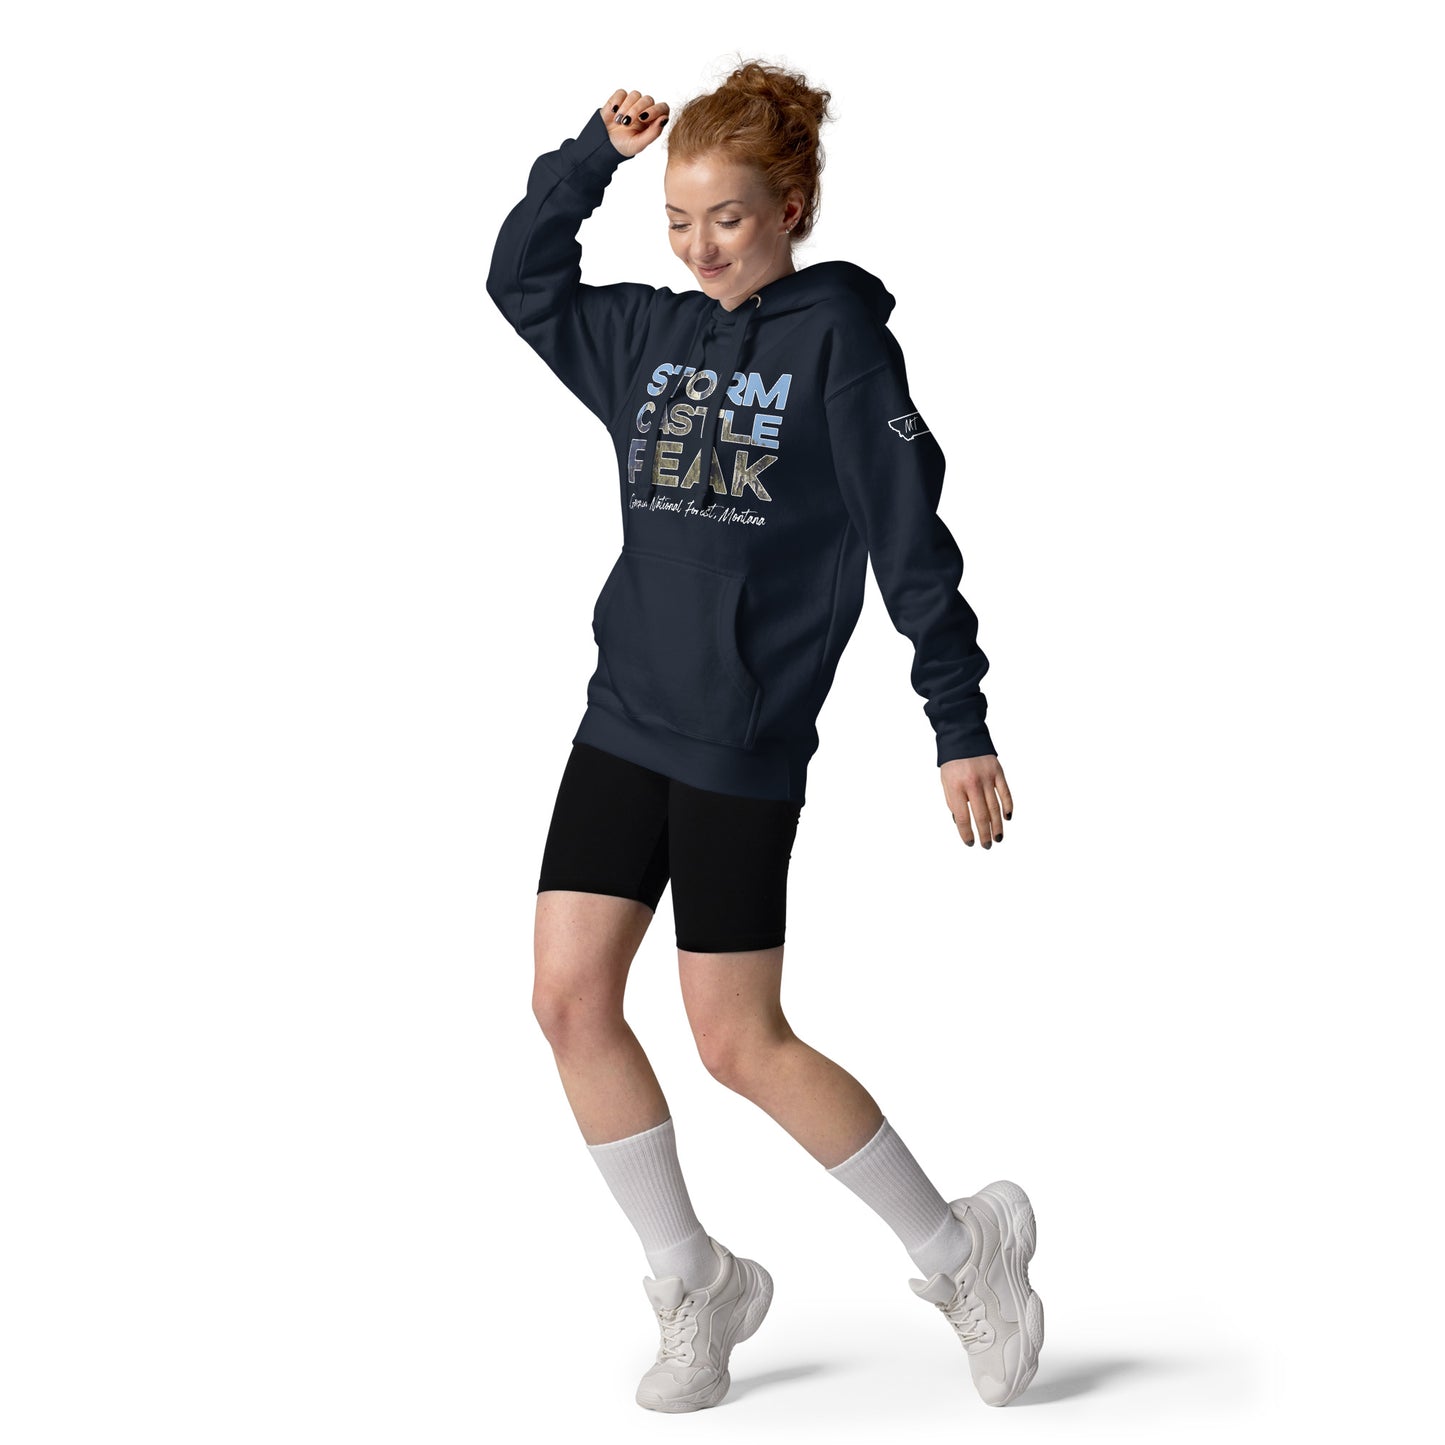 Front-Side view of Storm Castle Peak in Custer Gallatin National Forest Montana Navy Women's Hoodie from Park Attire